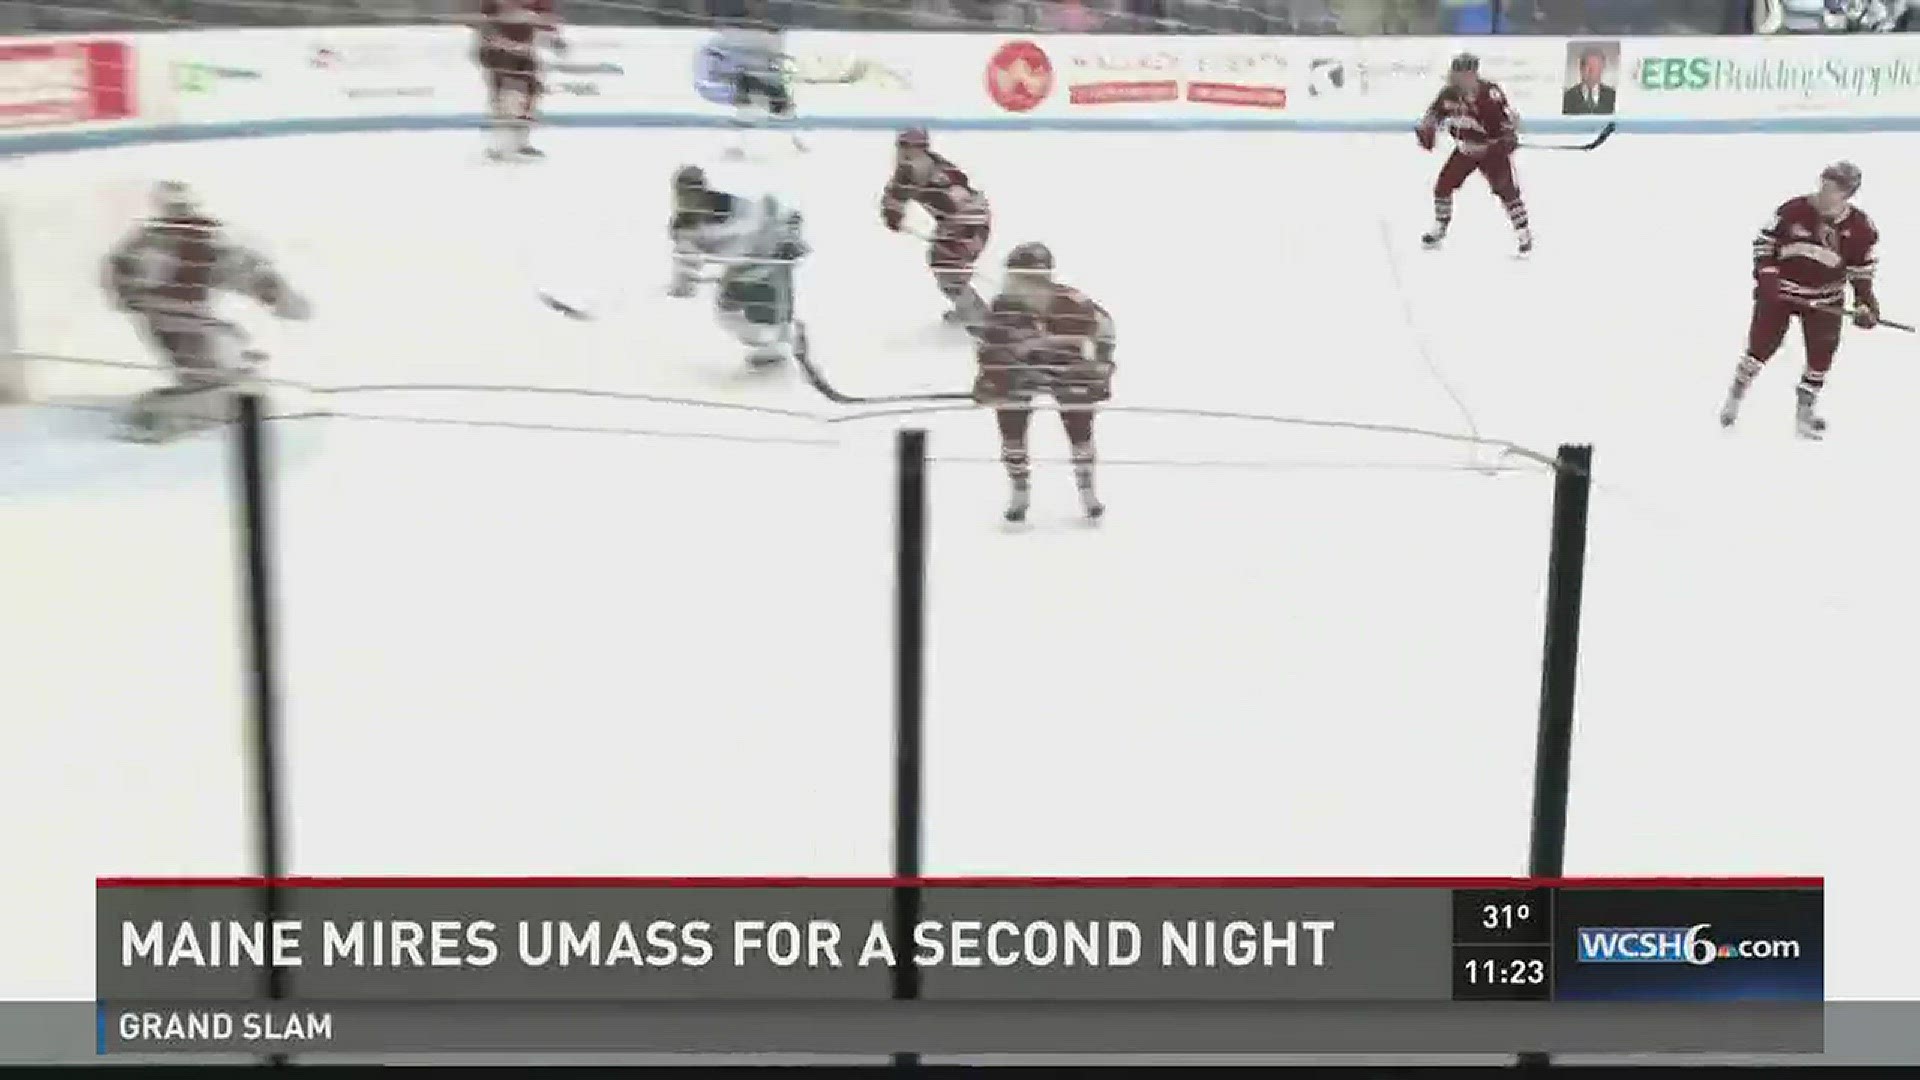 Maine mires UMass for second night